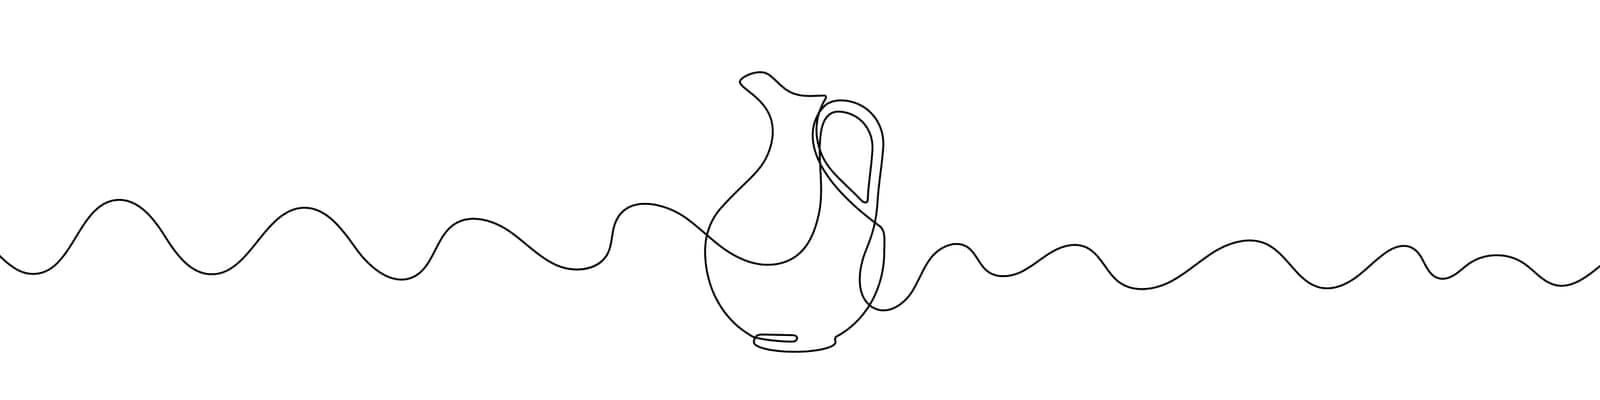 Continuous line drawing of water jug. Line art of jug. One line drawing background. by Chekman